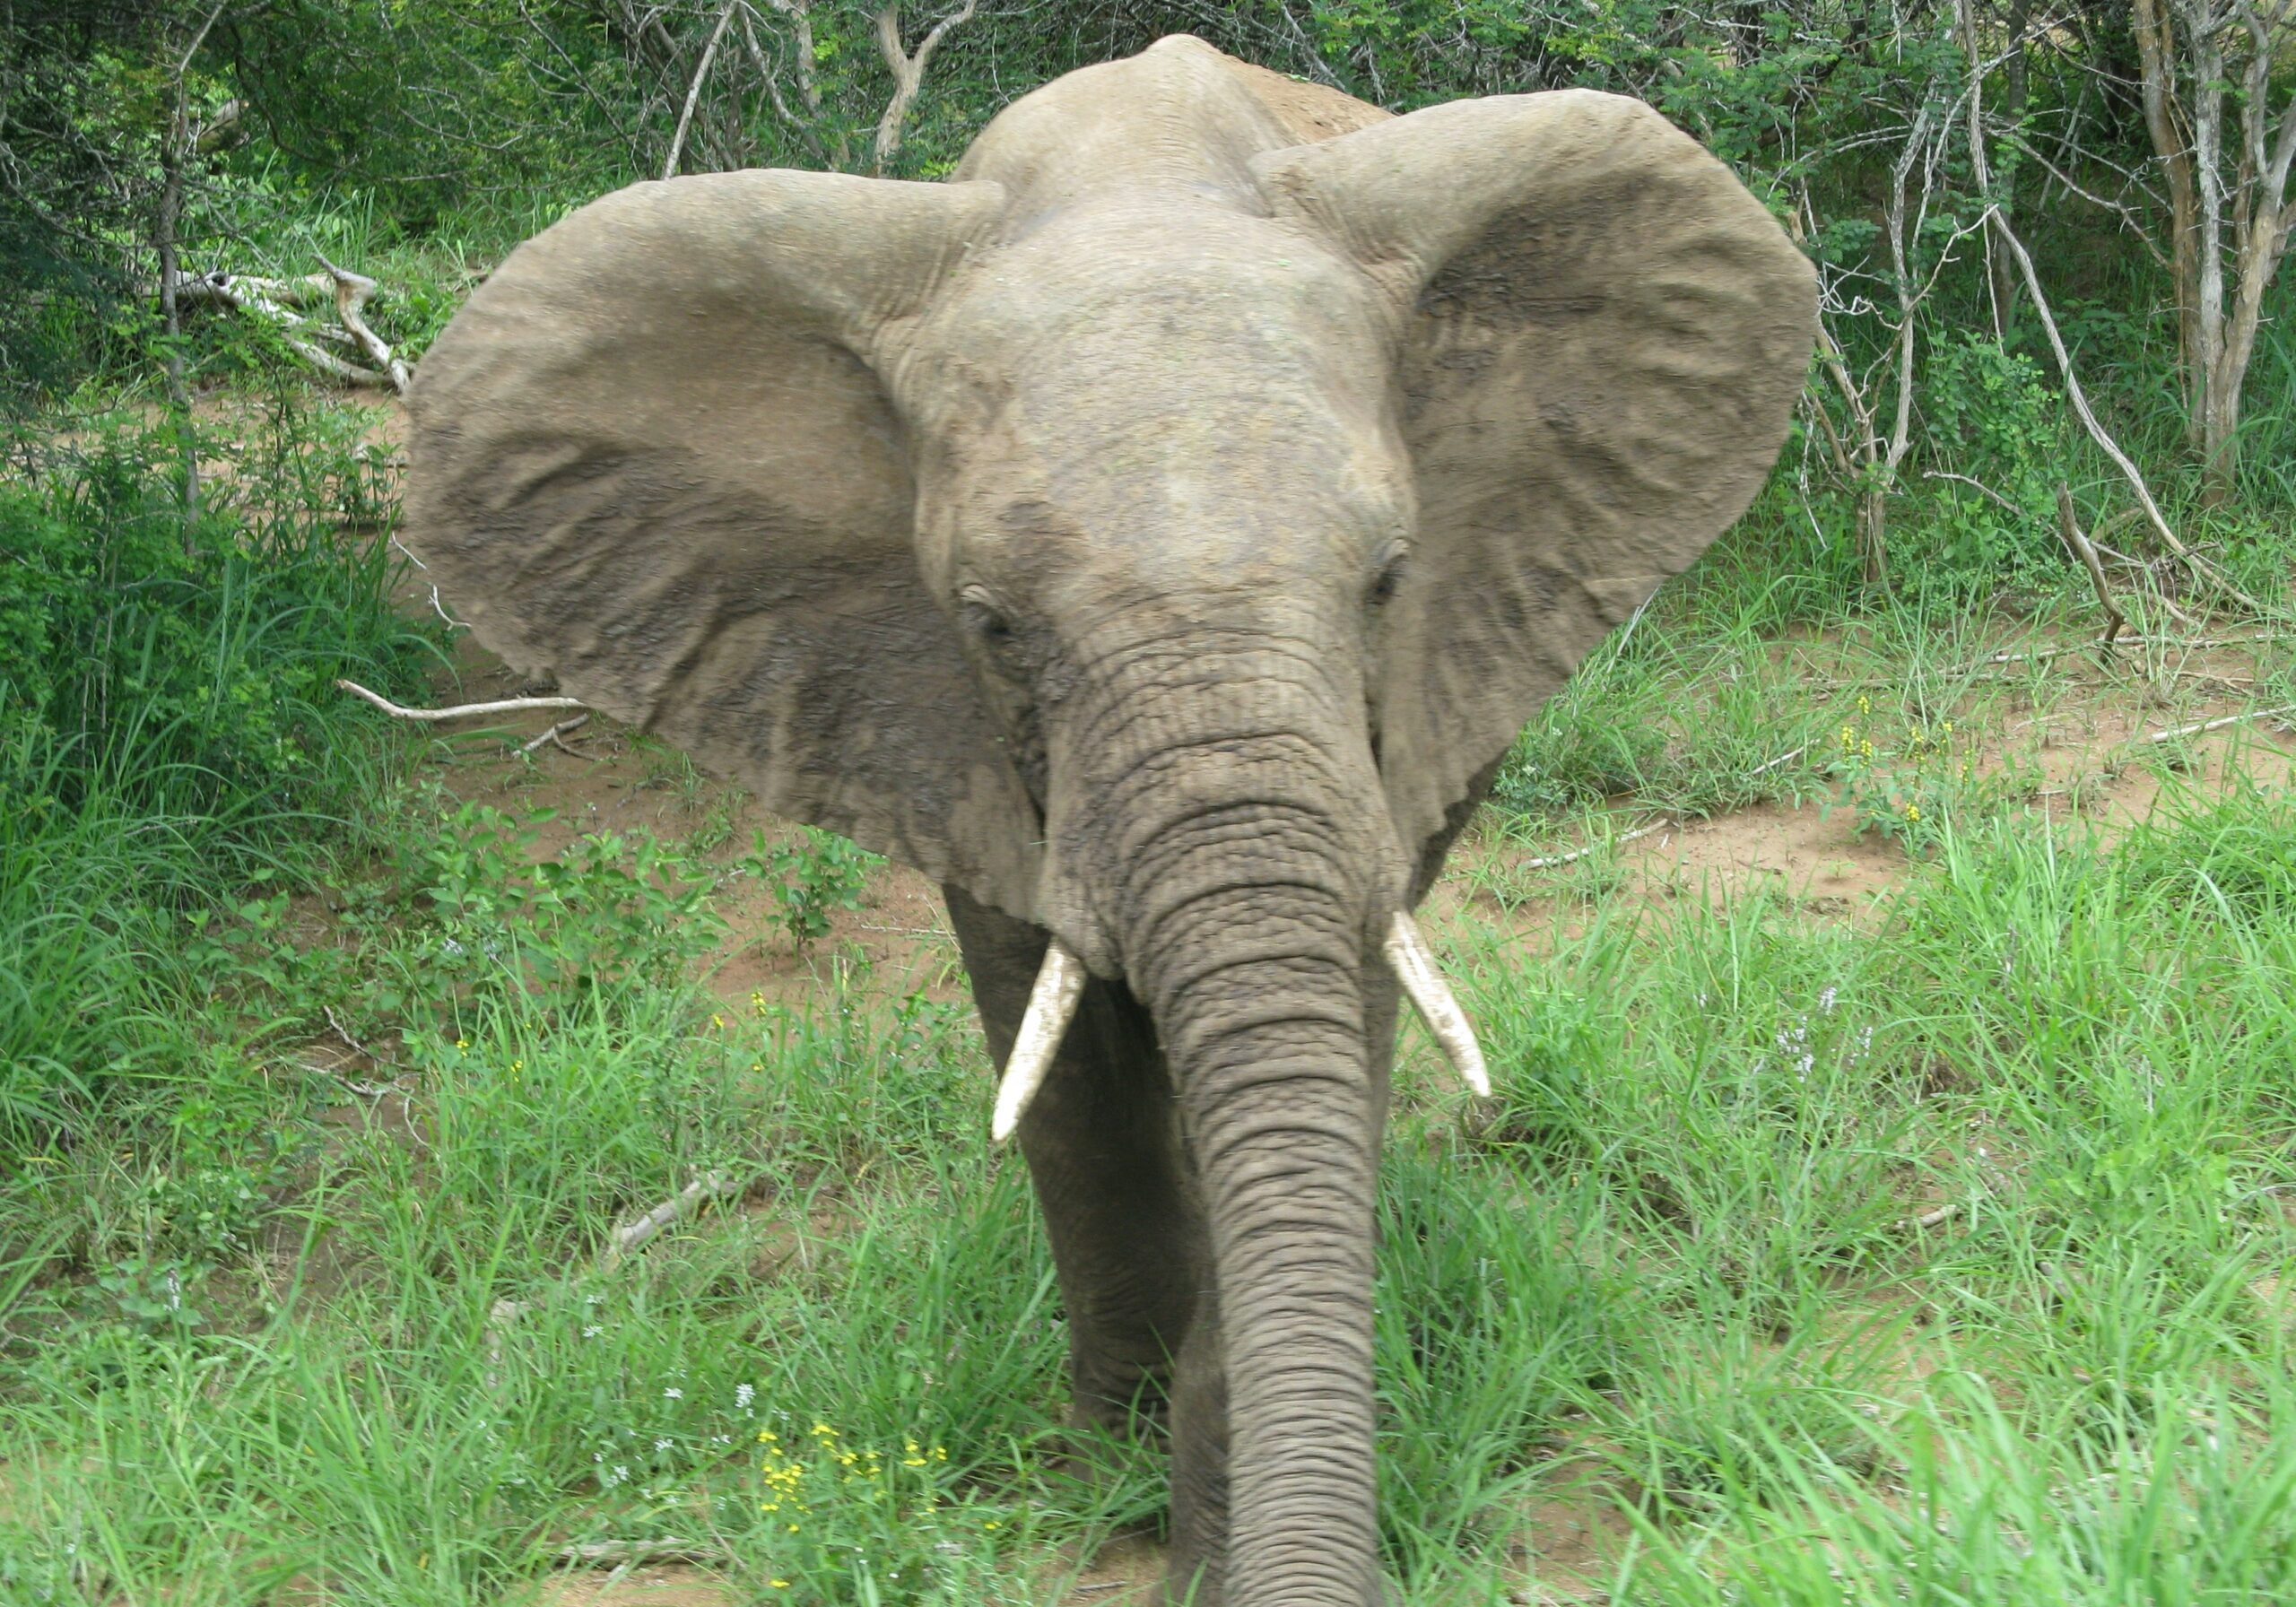 Front view of large elephant.